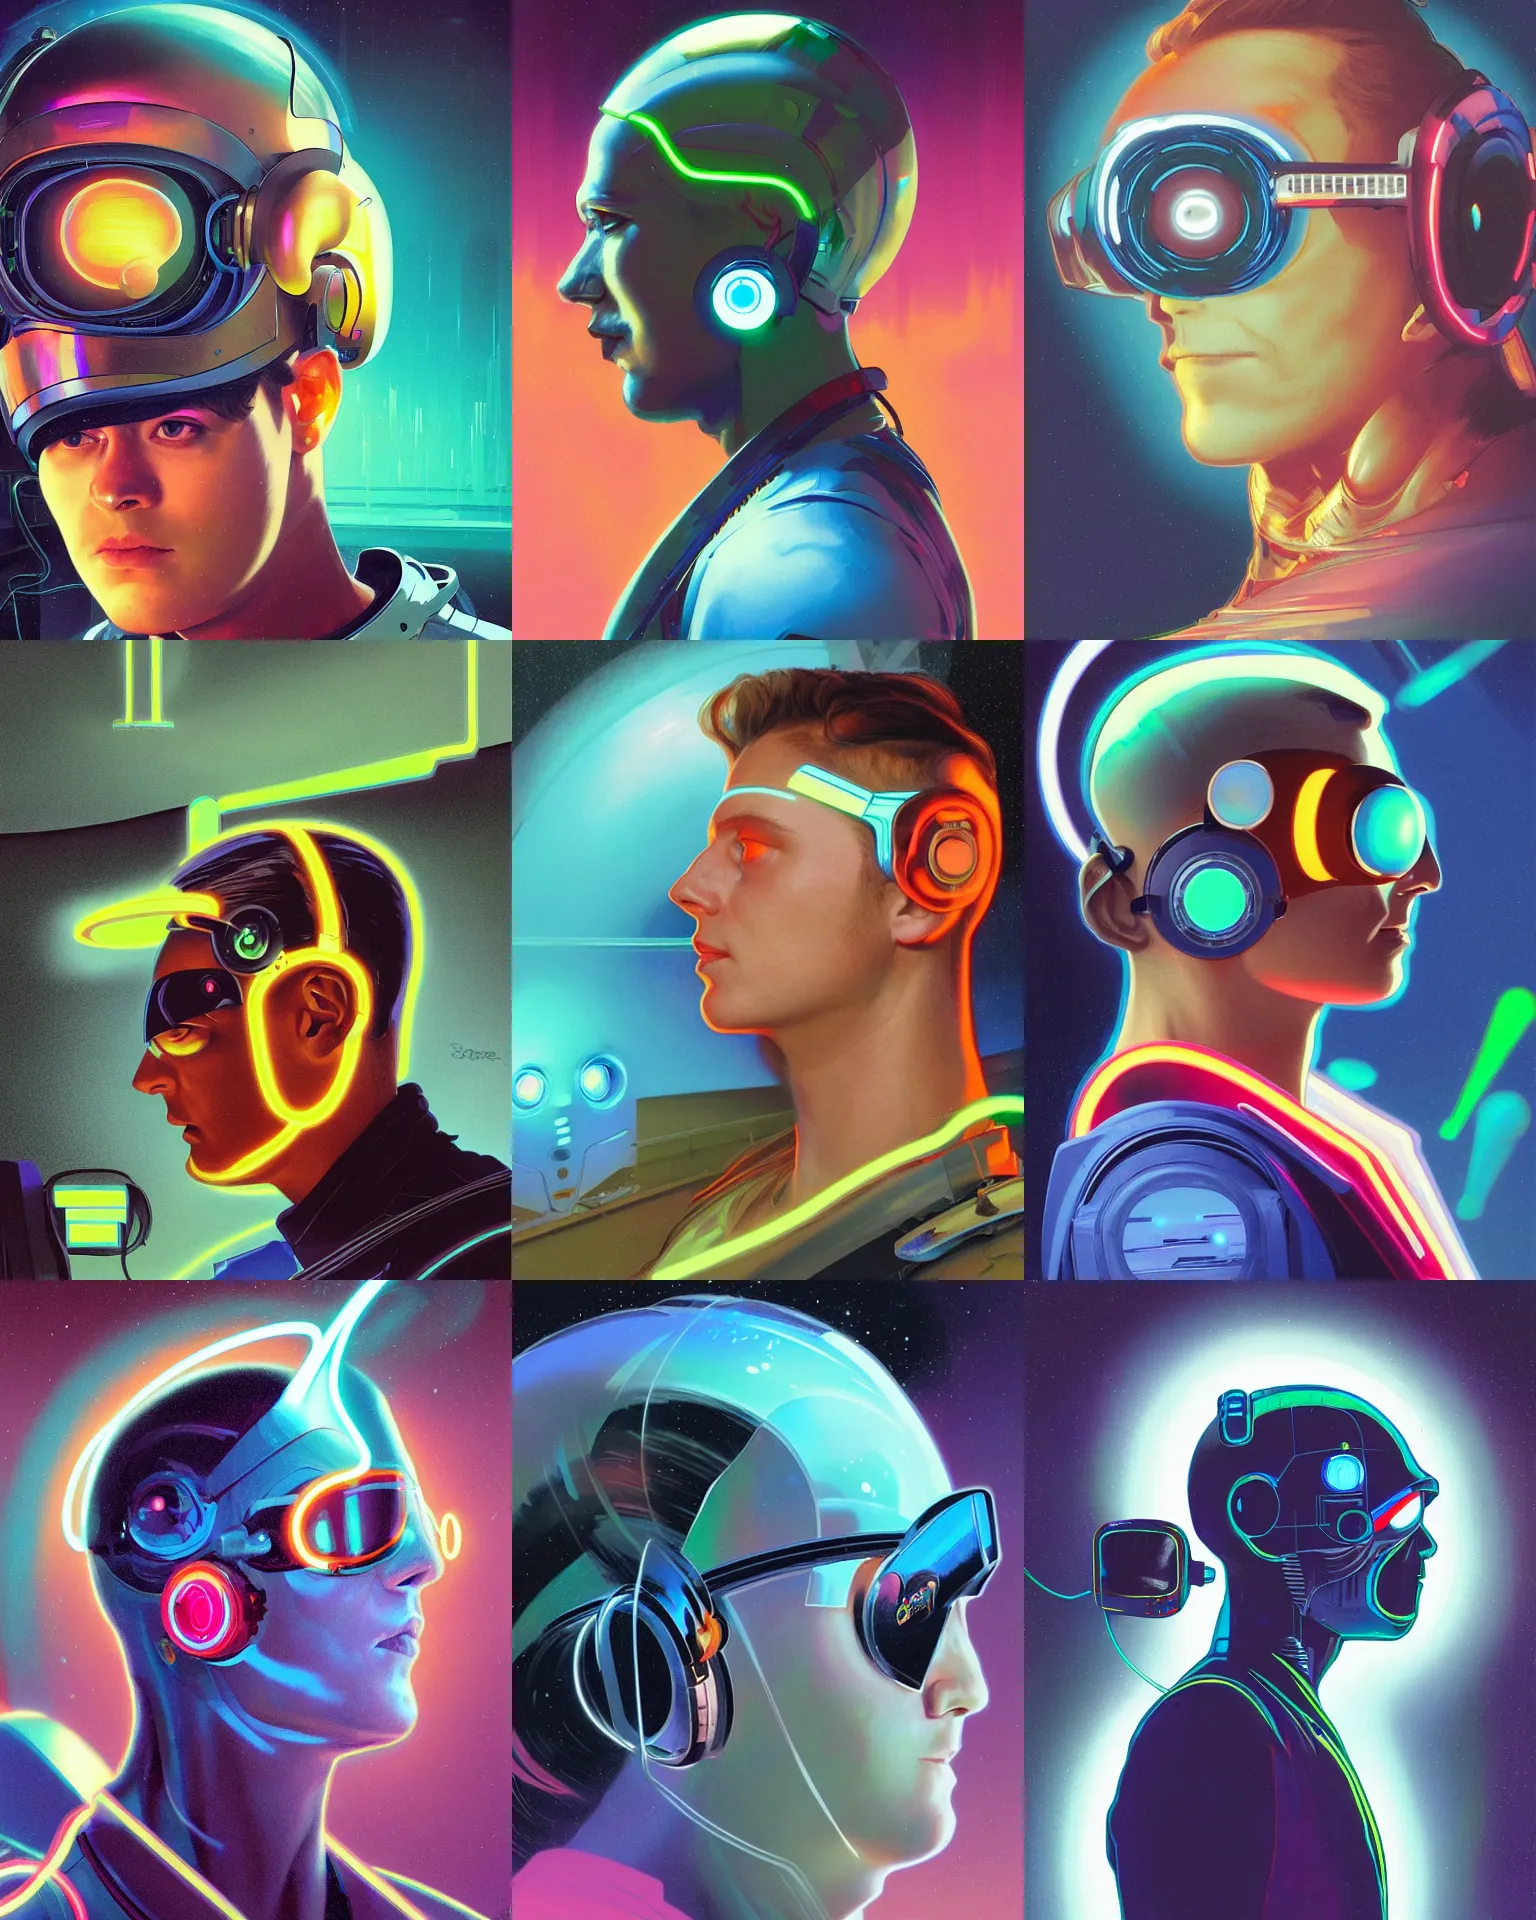 Prompt: side view future coder man, sleek cyclops display over eyes and glowing headset, neon accents, holographic colors, desaturated headshot portrait digital painting byjohn berkey, tom whalen, alex grey, alphonse mucha, donoto giancola, dean cornwall, rhads, astronaut cyberpunk electric lights profile